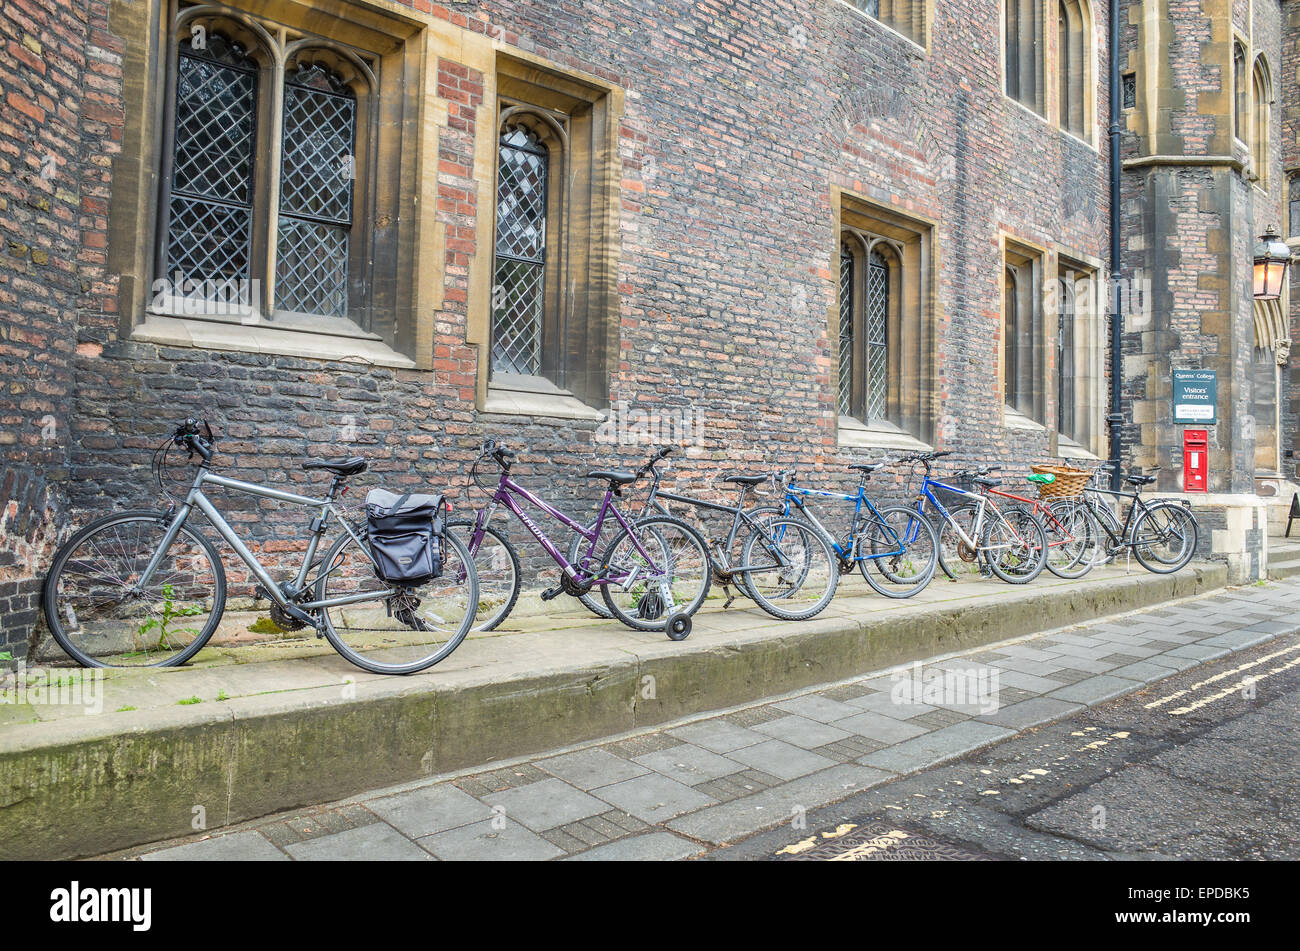 Bicycles parked outside Queen's college, Cambridge university, England. Stock Photo